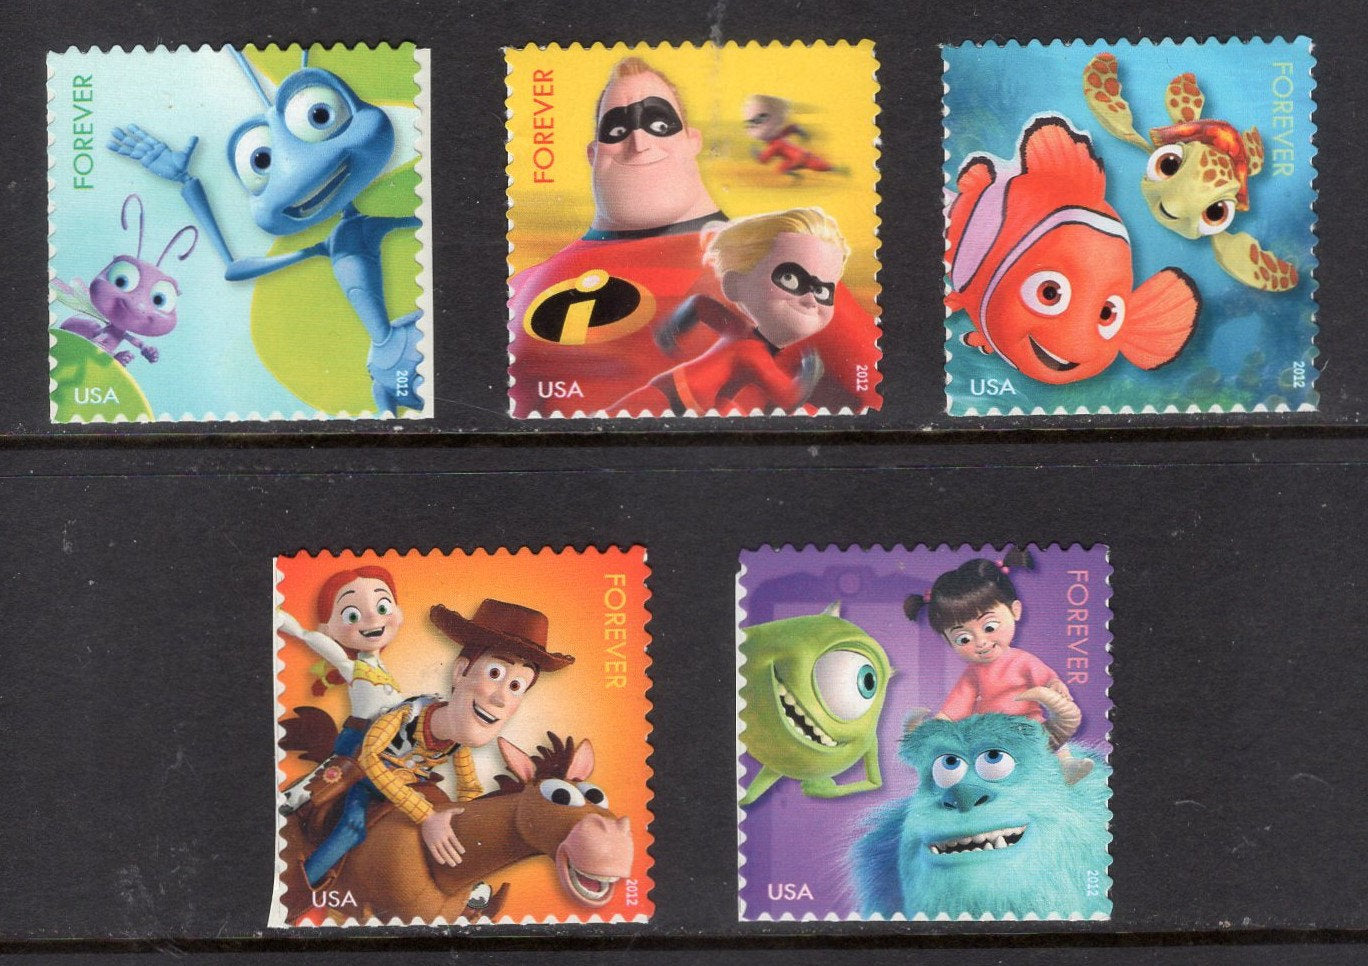 1 MAIL A SMILE Disney Pixar 5 Singles Postage Stamps - Mint Post Office Fresh - s4677 -